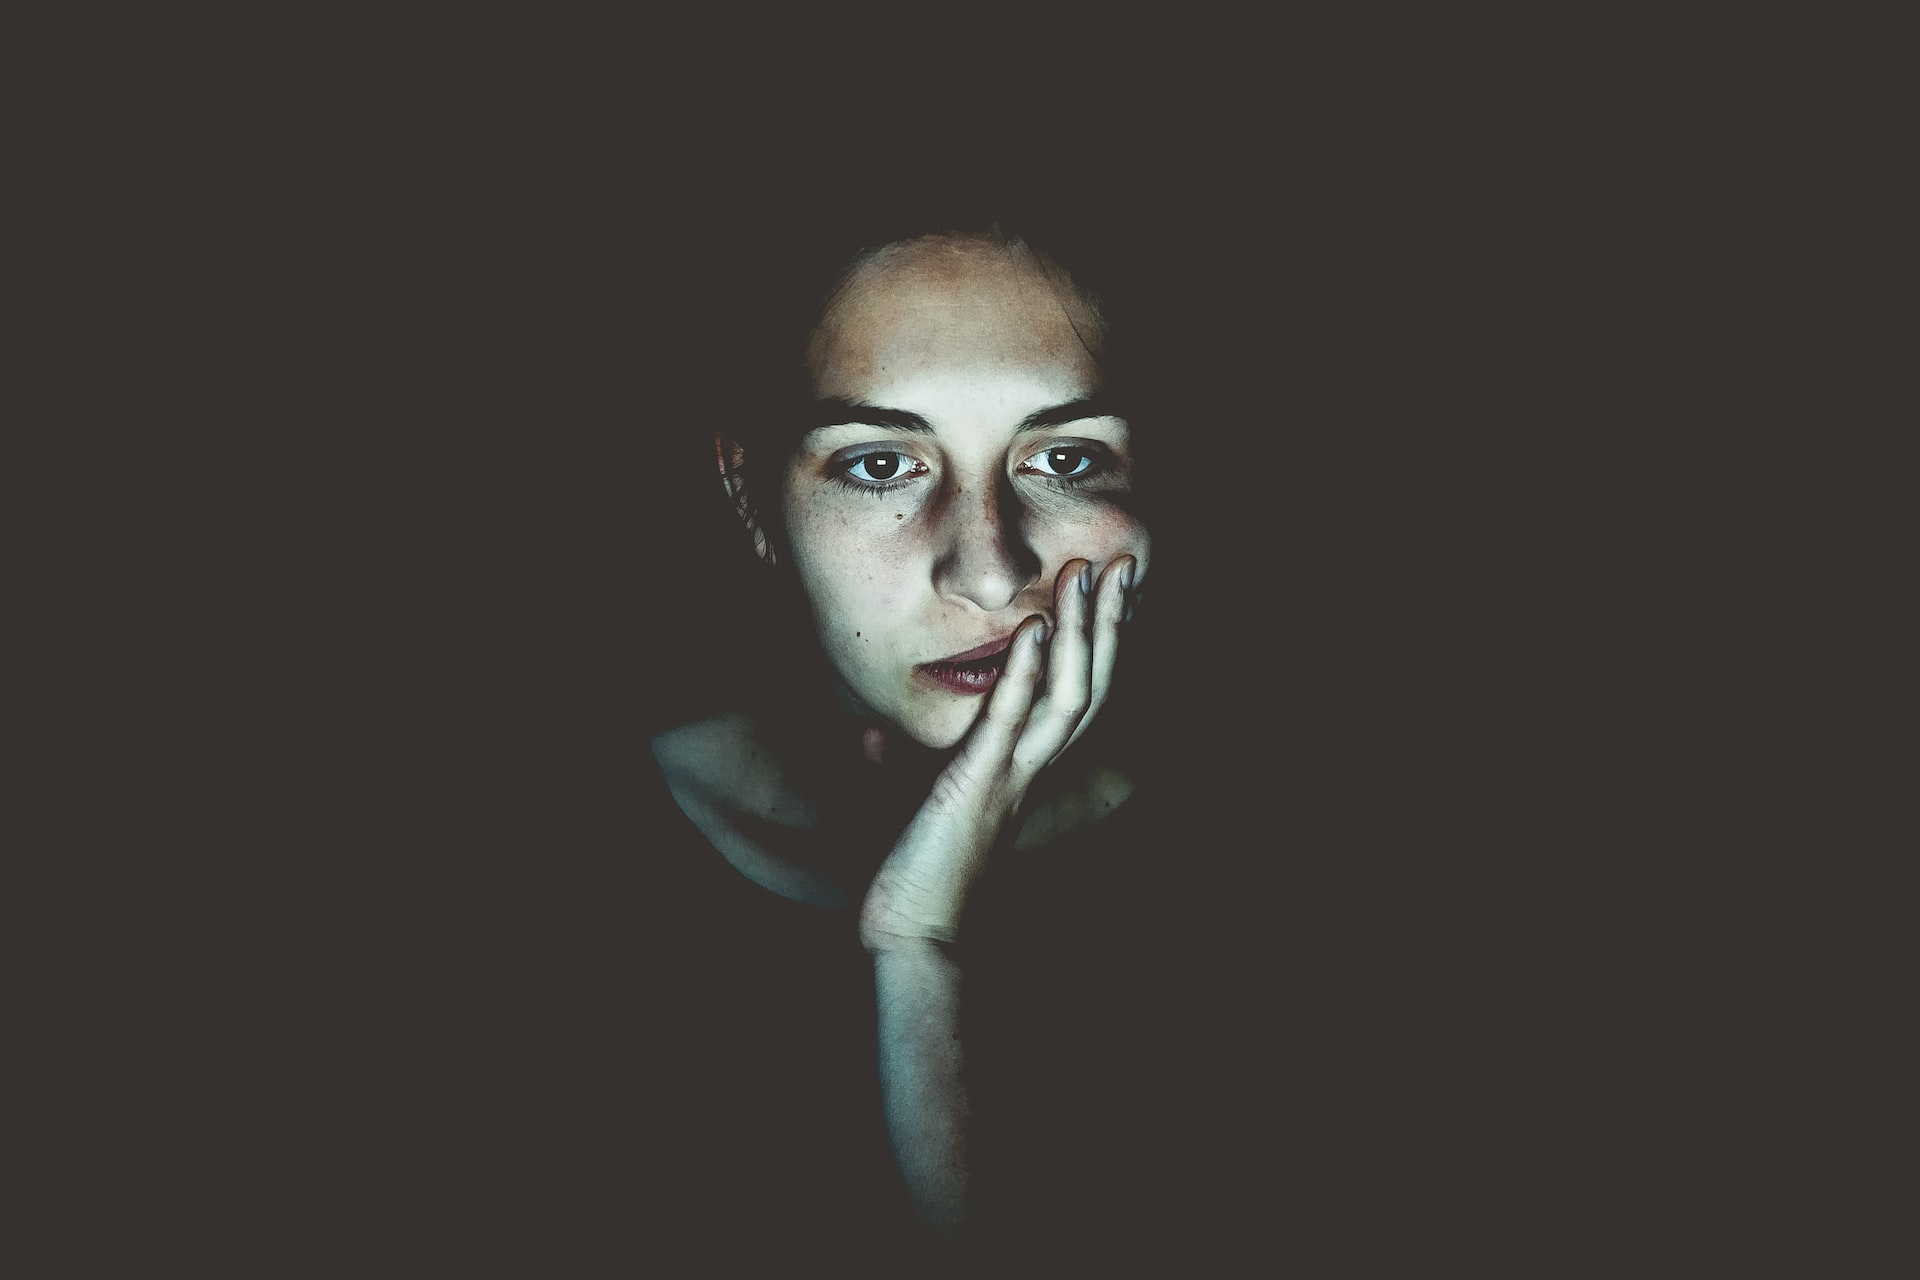 A person with a contemplative expression holds their hand to their face. The low, dim lighting highlights their face against a dark background, creating a dramatic effect. The person's eyes appear focused, suggesting they might be reflecting on trauma treatment, adding to the pensive mood of the image.